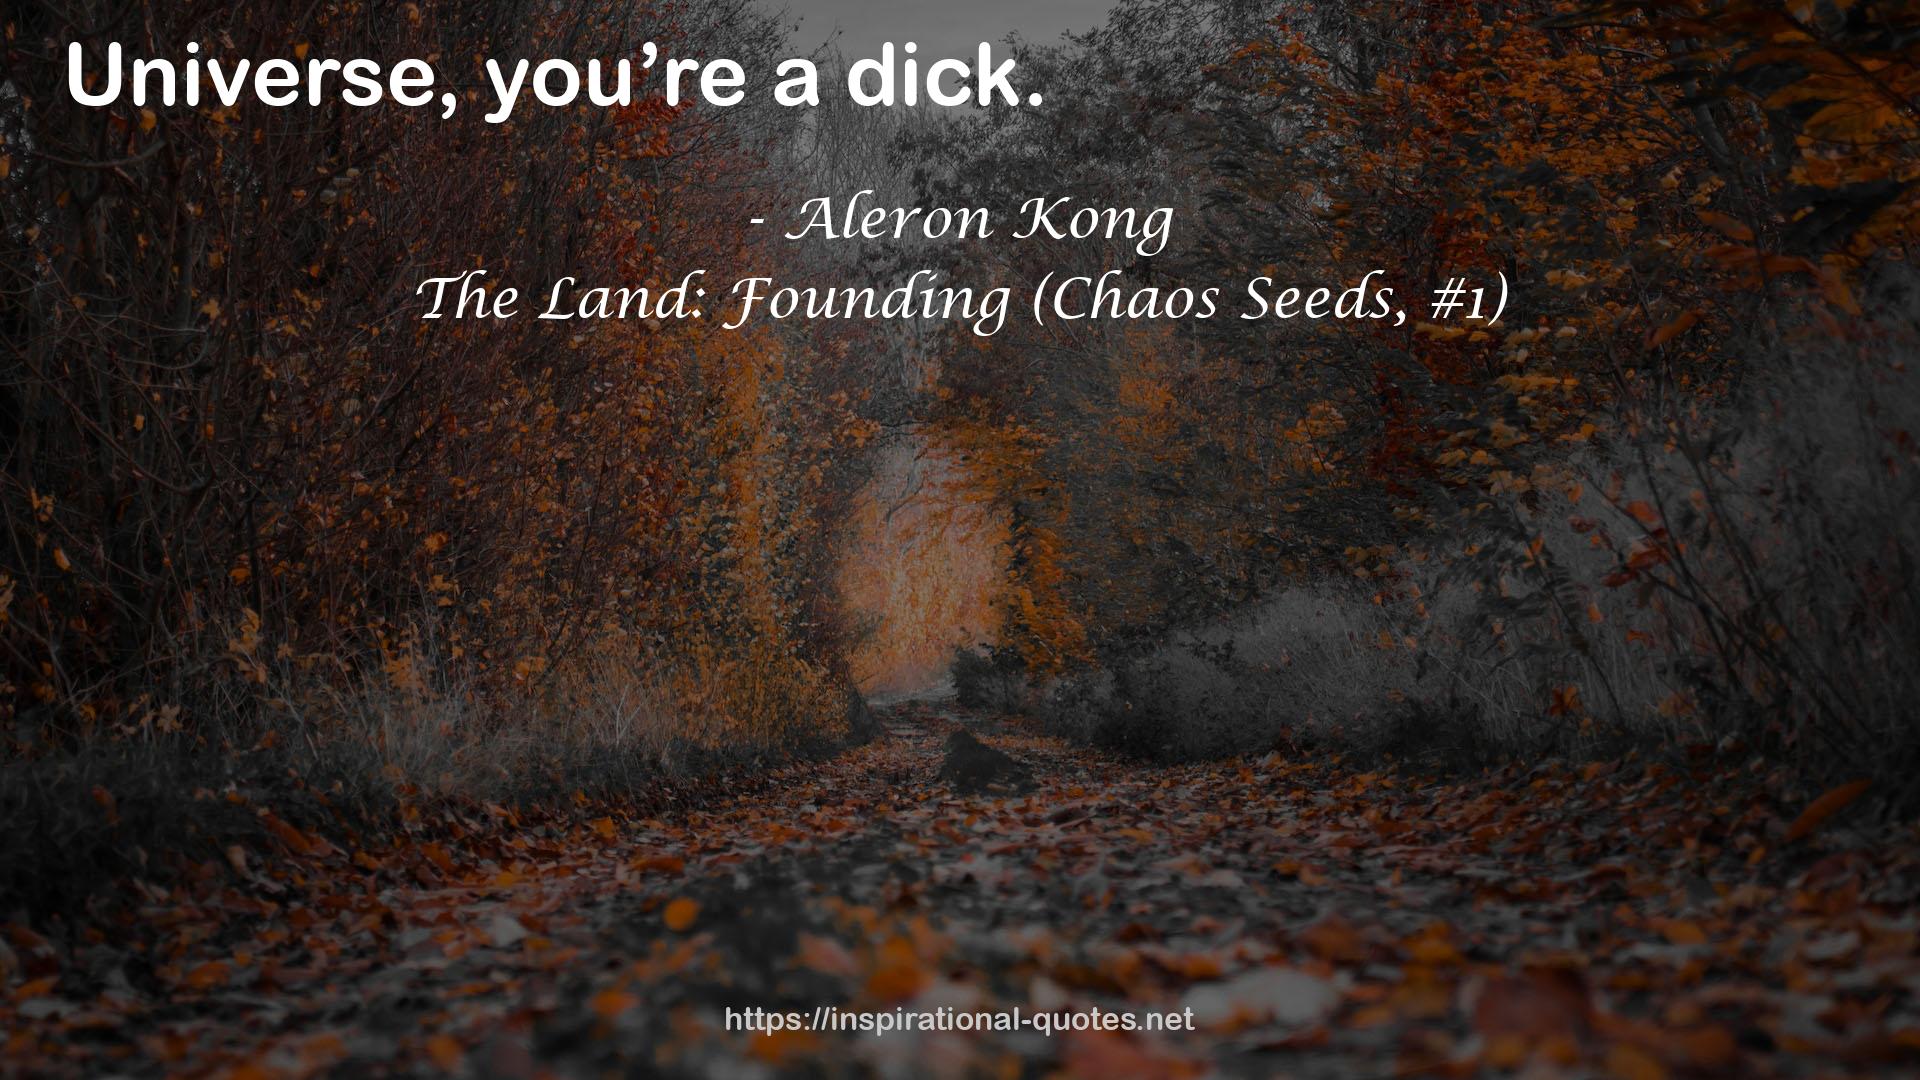 The Land: Founding (Chaos Seeds, #1) QUOTES